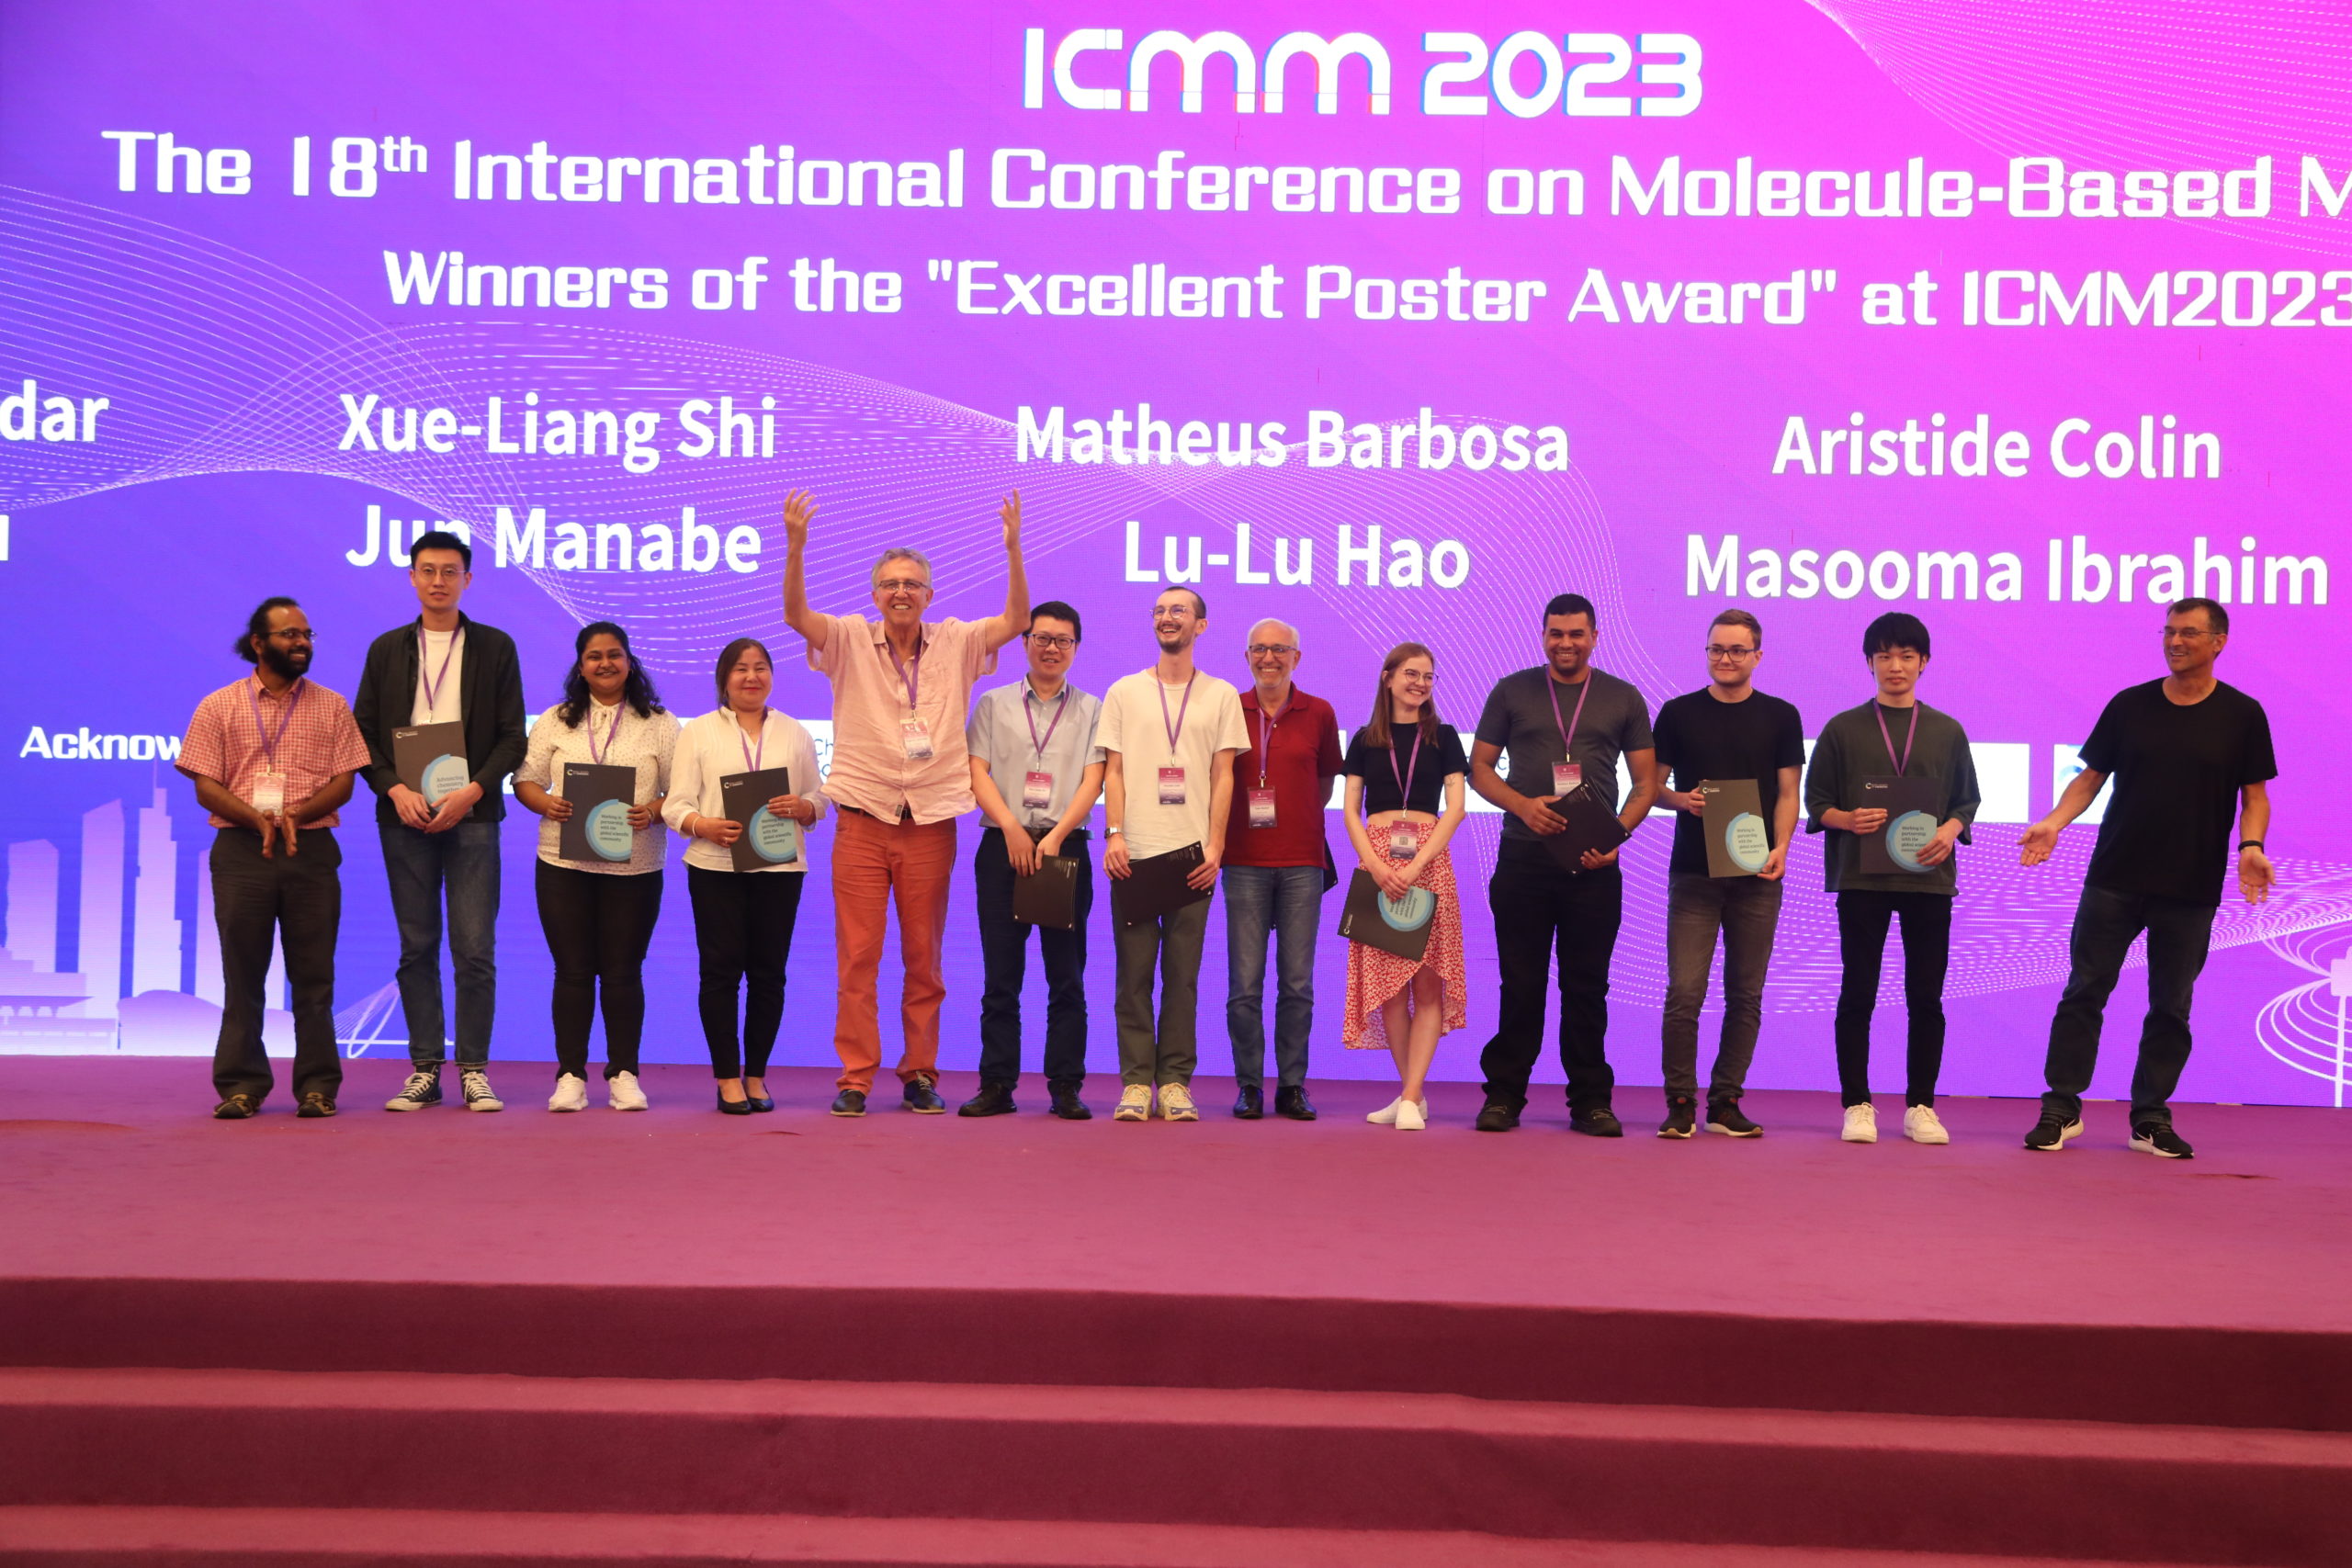 Group photo of the "Excellent Poster Award" winners.